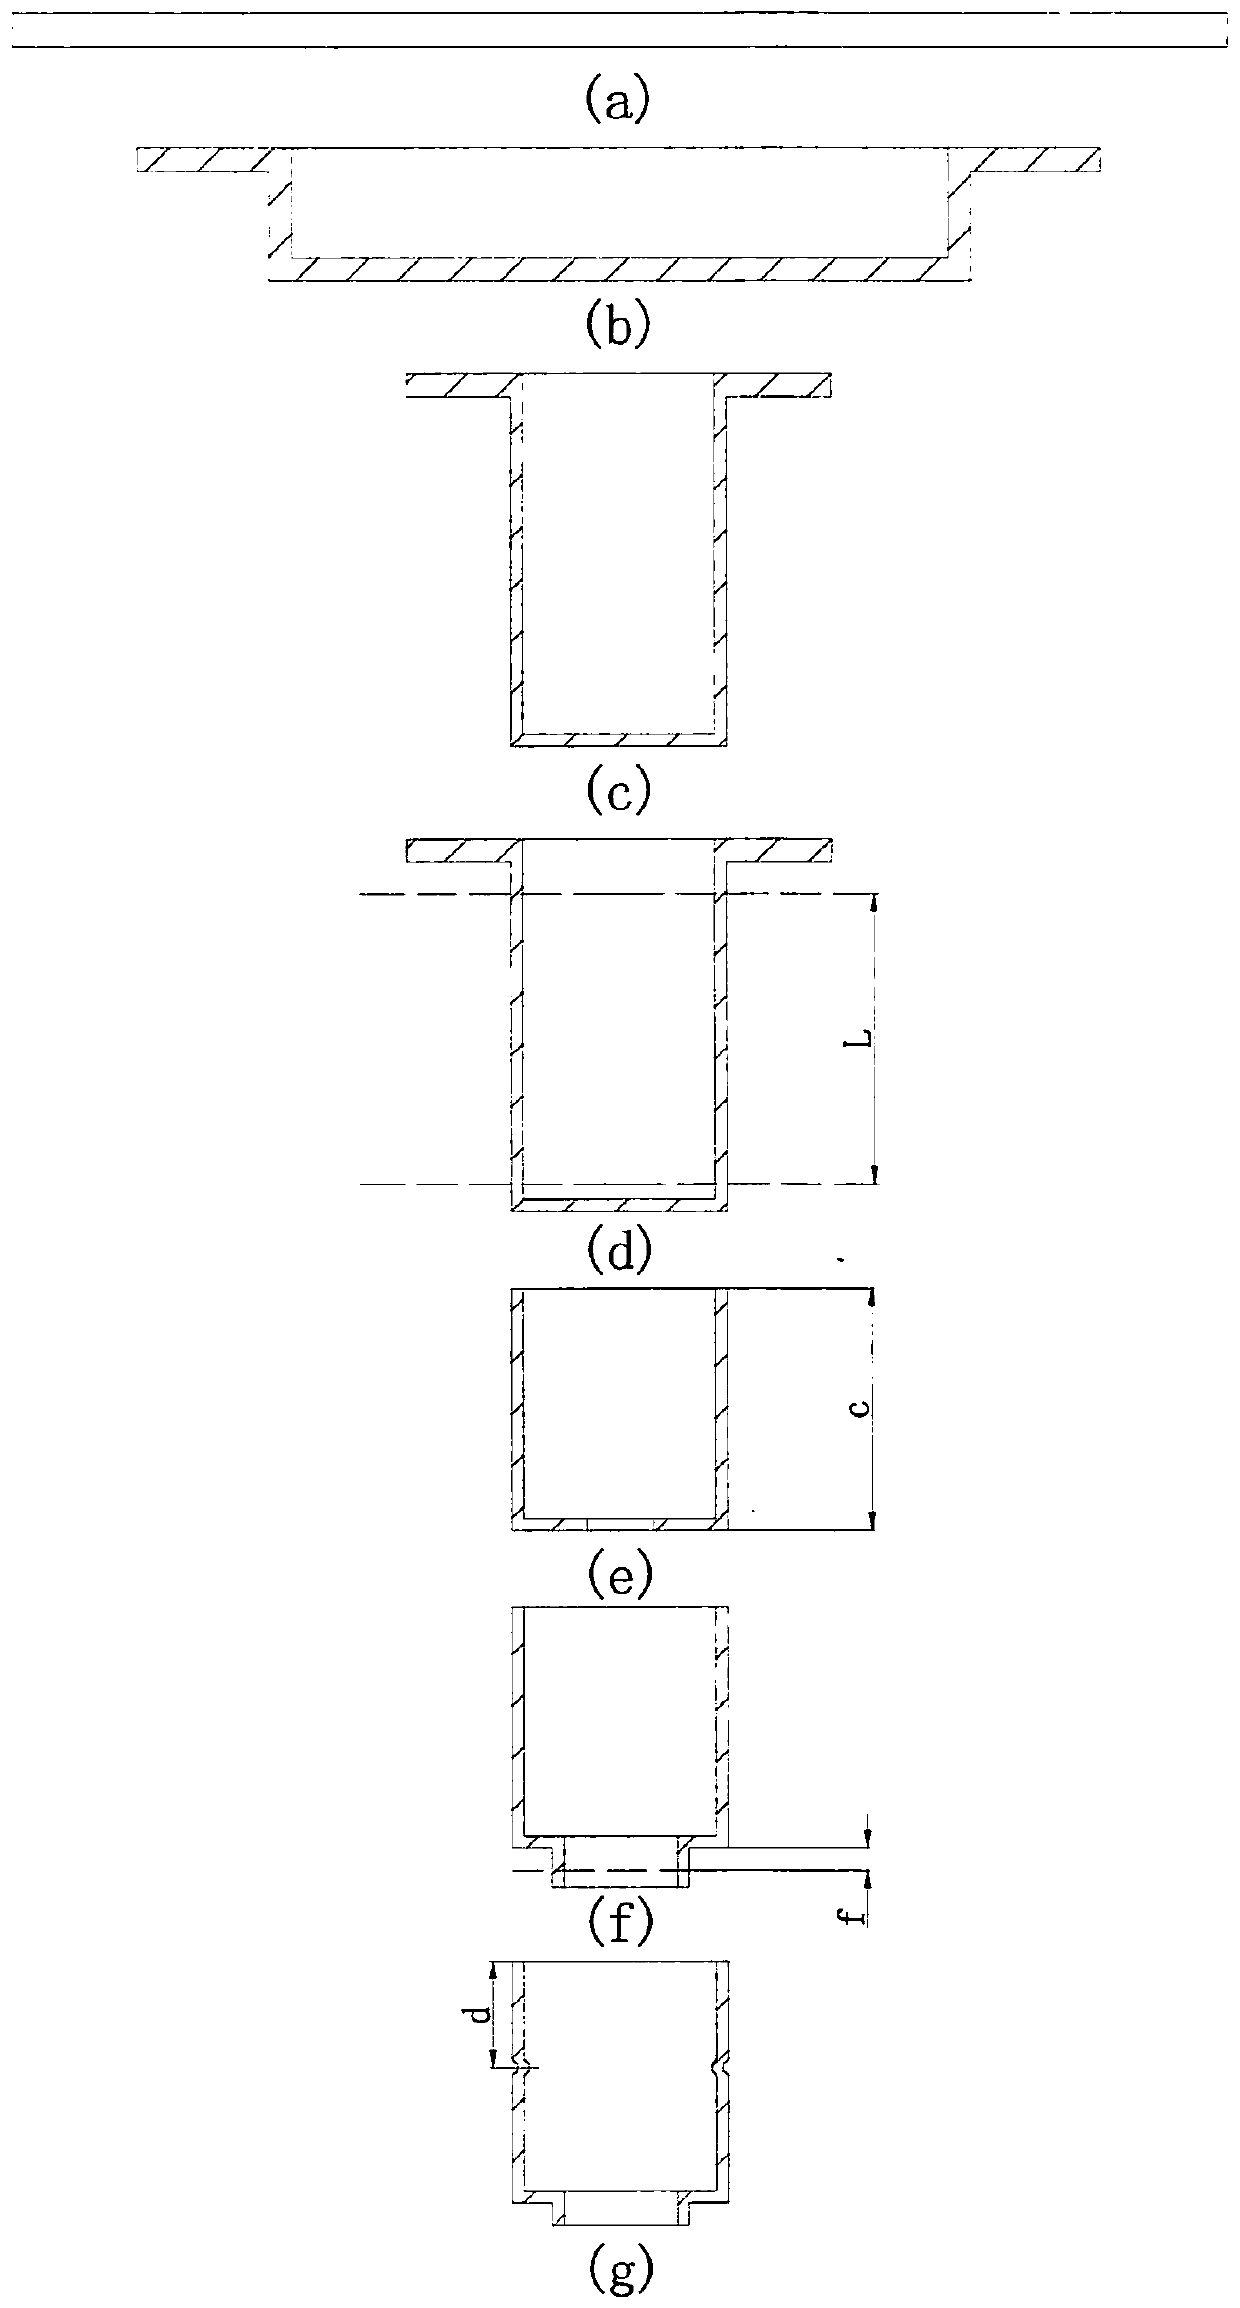 Expansion-type welded tensile joint and its realization process